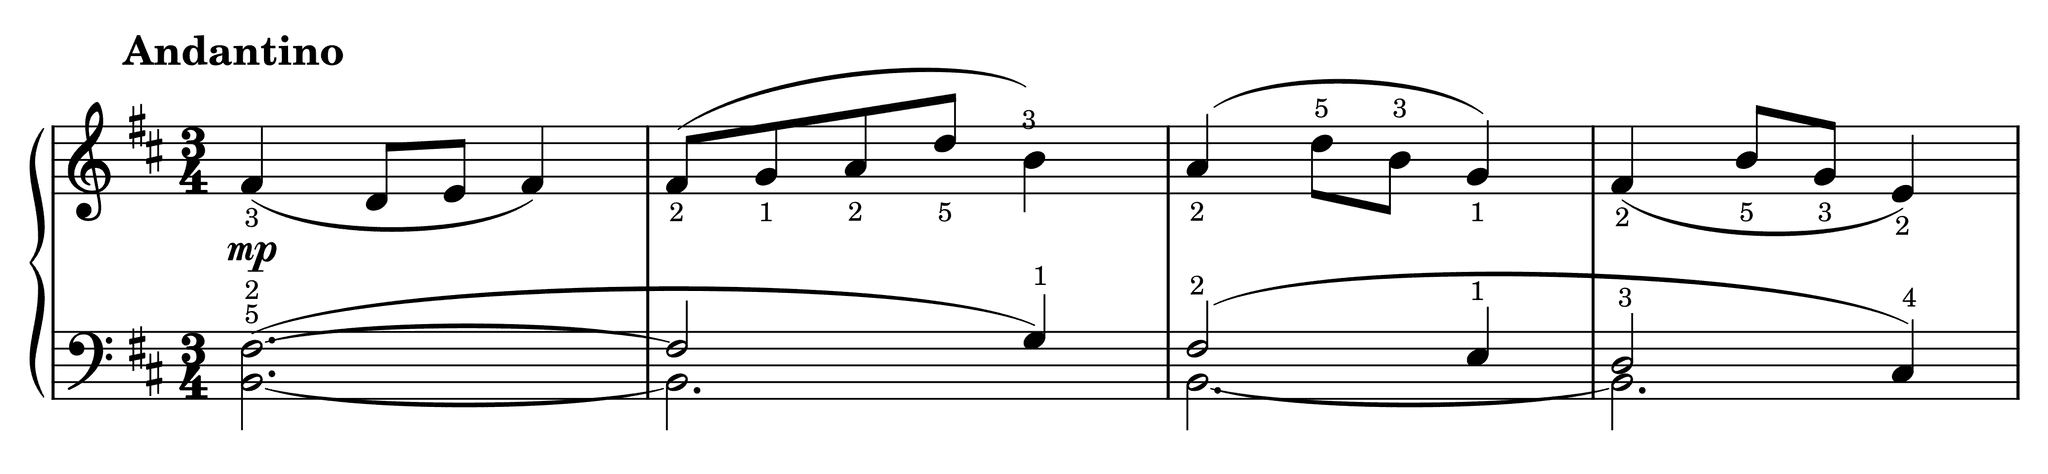 Excerpt of At Night on the River Op. 27, No. 4